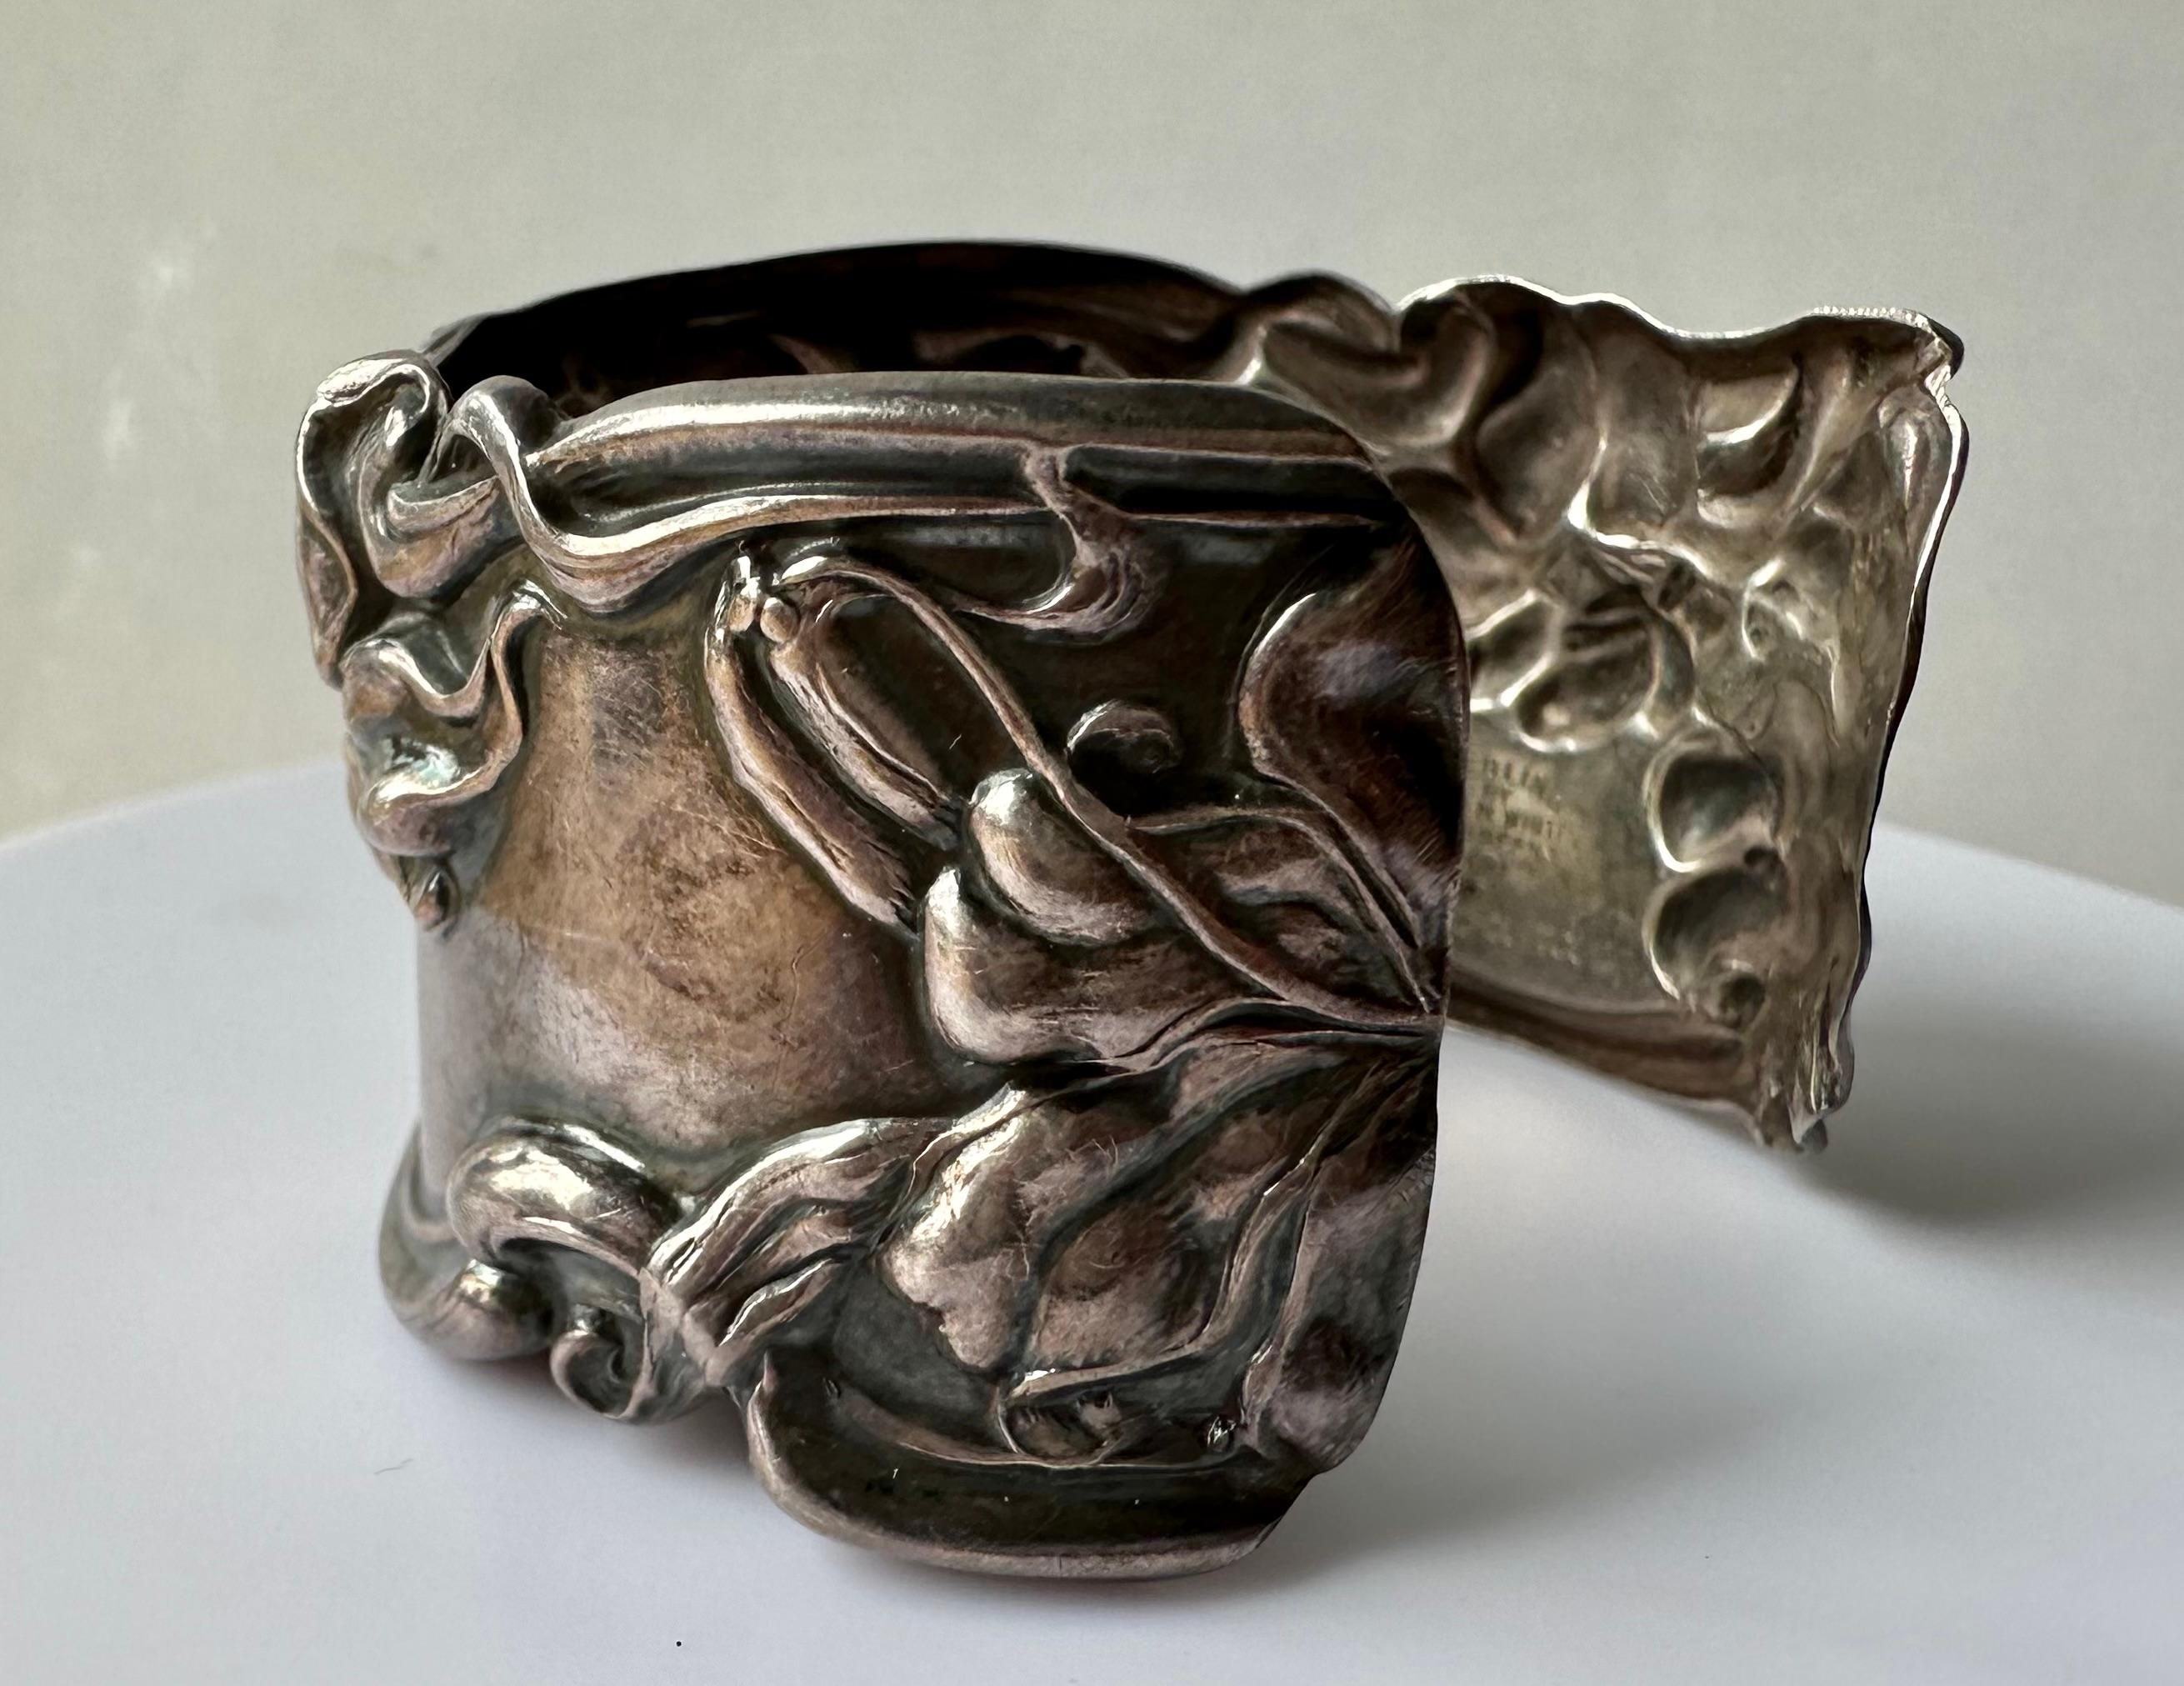 A Frank Whiting Iris Themed Silver Cuff Bracelet In Good Condition For Sale In Coupeville, WA